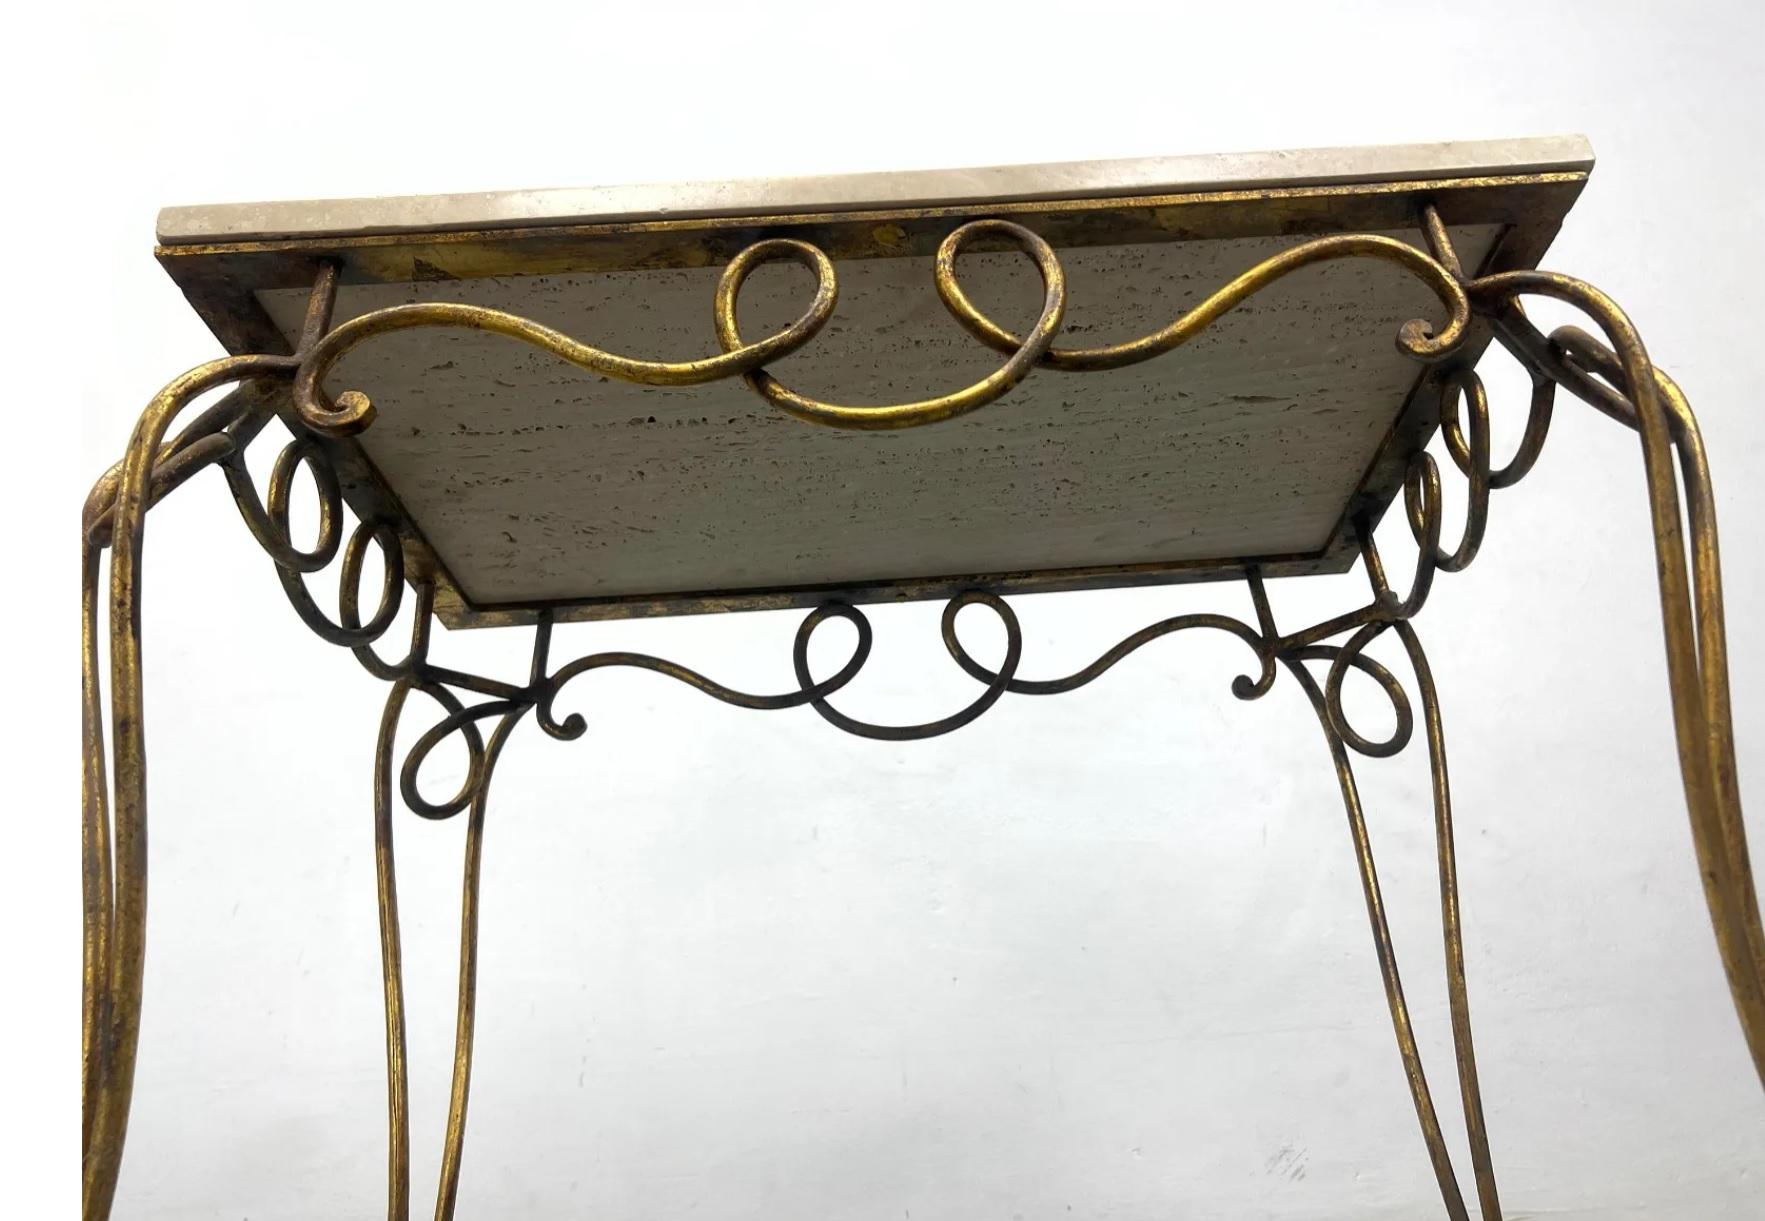 Midcentury French Rene Prou Art Deco Gilded Iron End Tables with Travertine Tops For Sale 6